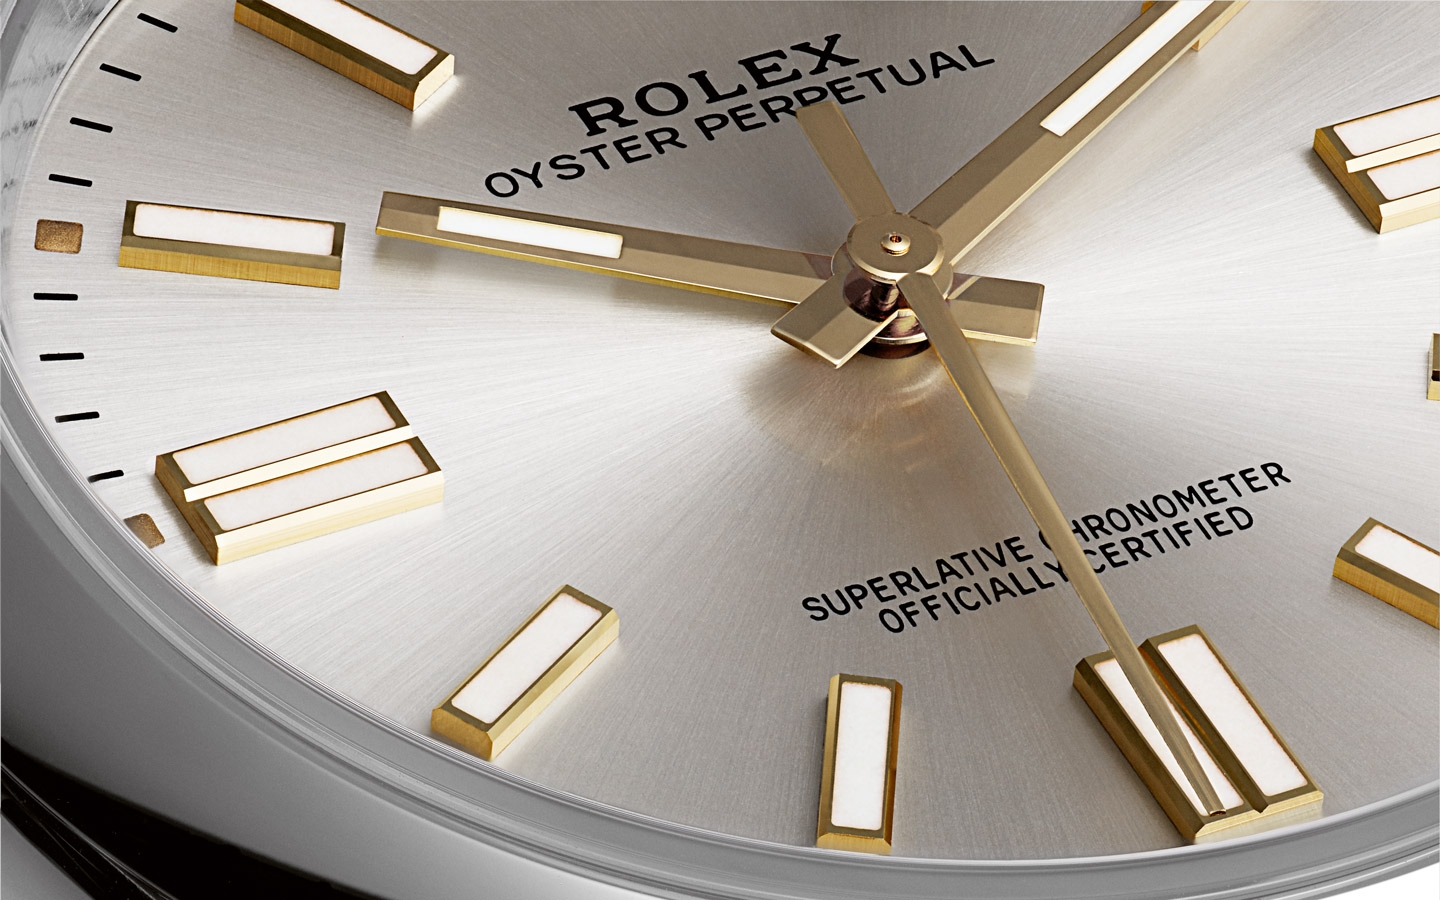 Rolex's gold and white hands